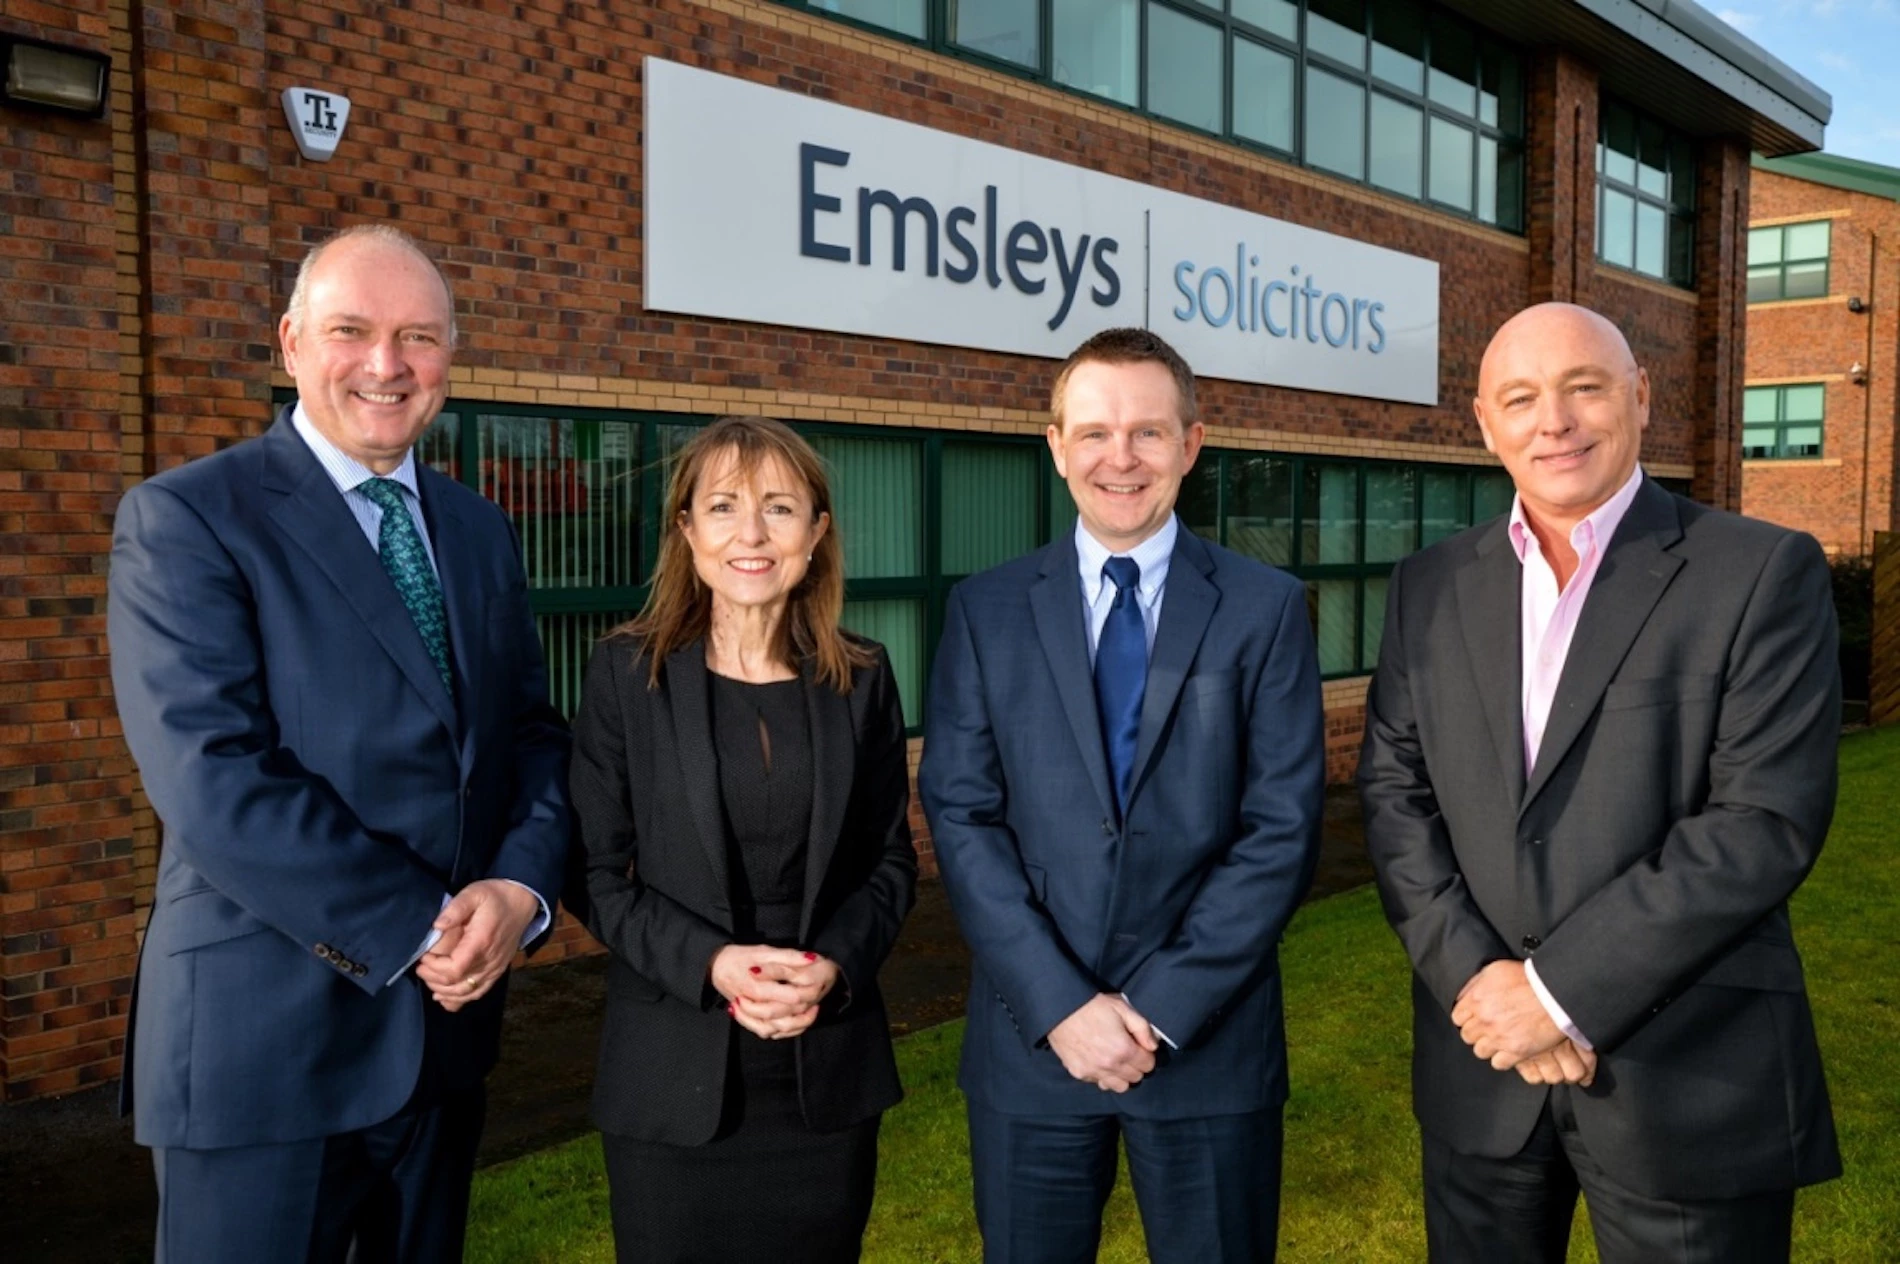 Director and Head of Personal Injury Andrew Greenwood, Head of Operations Rachel Walton, Director and Head of Conveyancing Alistair McKinlay, and Director Peter Watson.